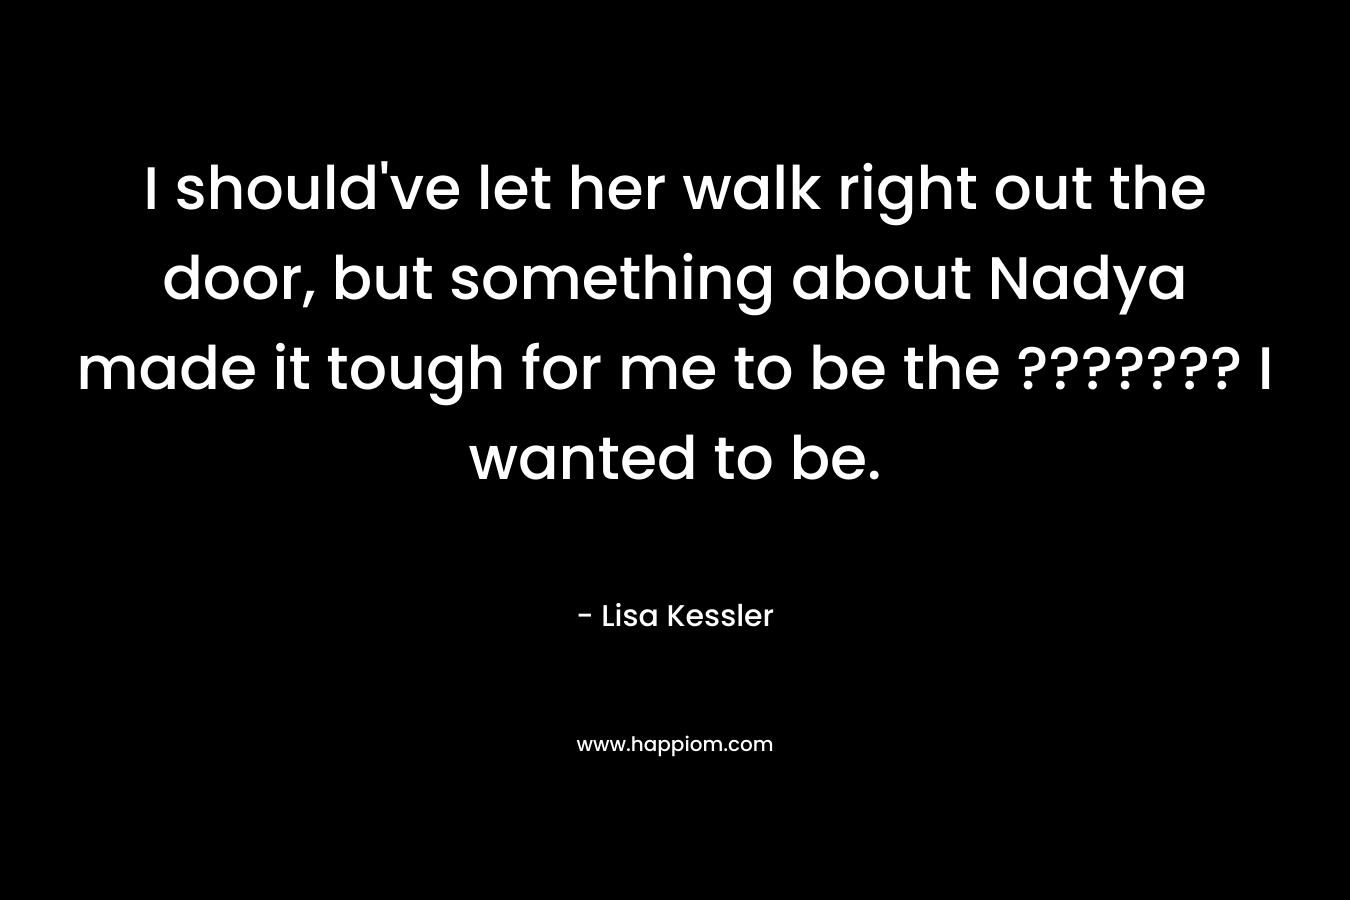 I should’ve let her walk right out the door, but something about Nadya made it tough for me to be the ??????? I wanted to be. – Lisa Kessler